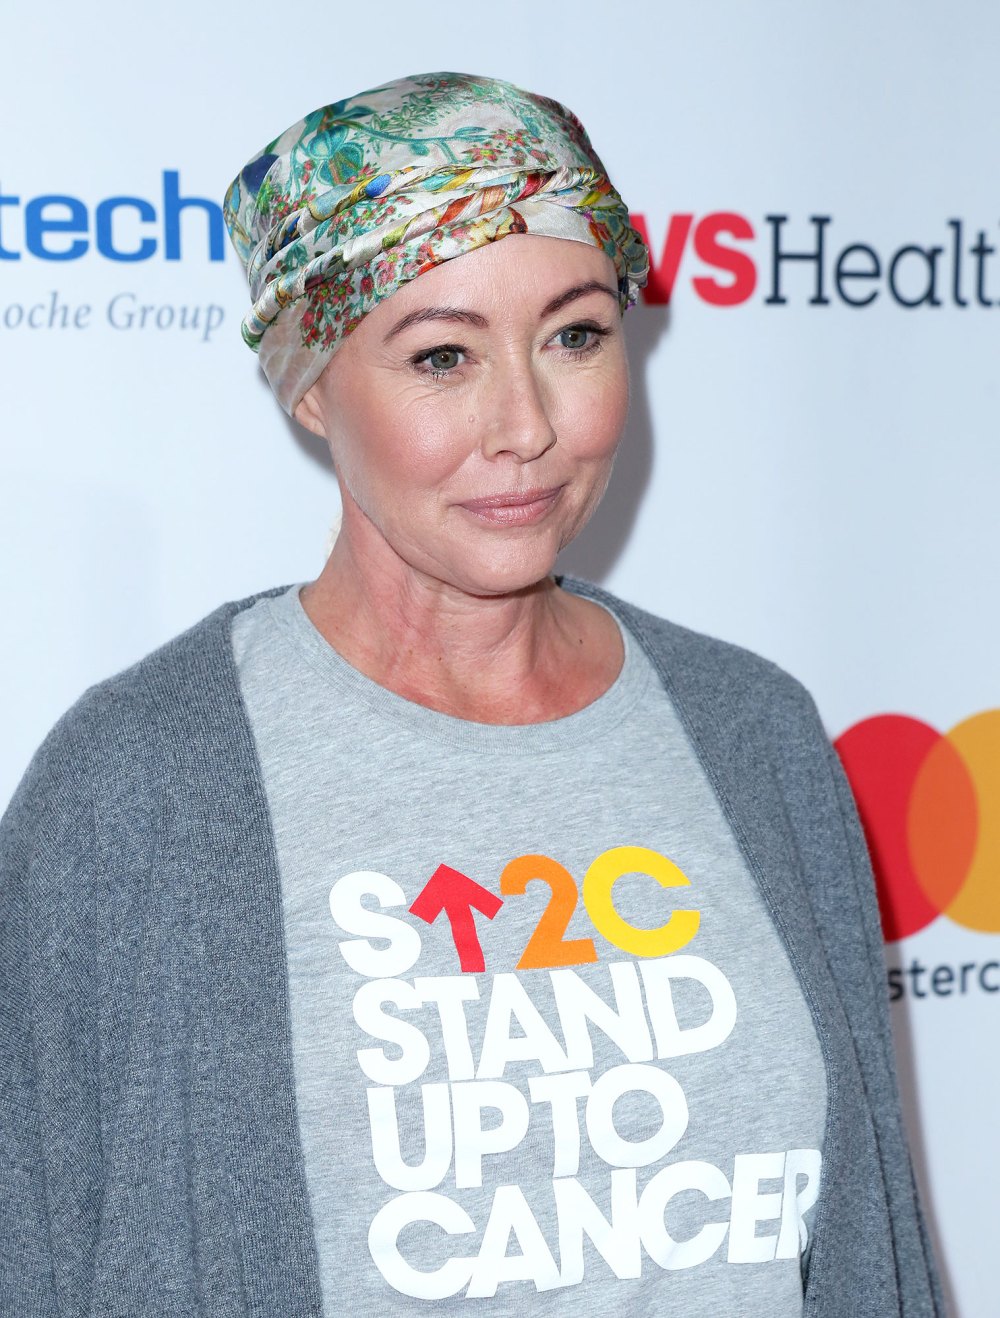 Shannen Doherty Opens Up About Beating Cancer: You Have to ‘Keep Plowing Through’